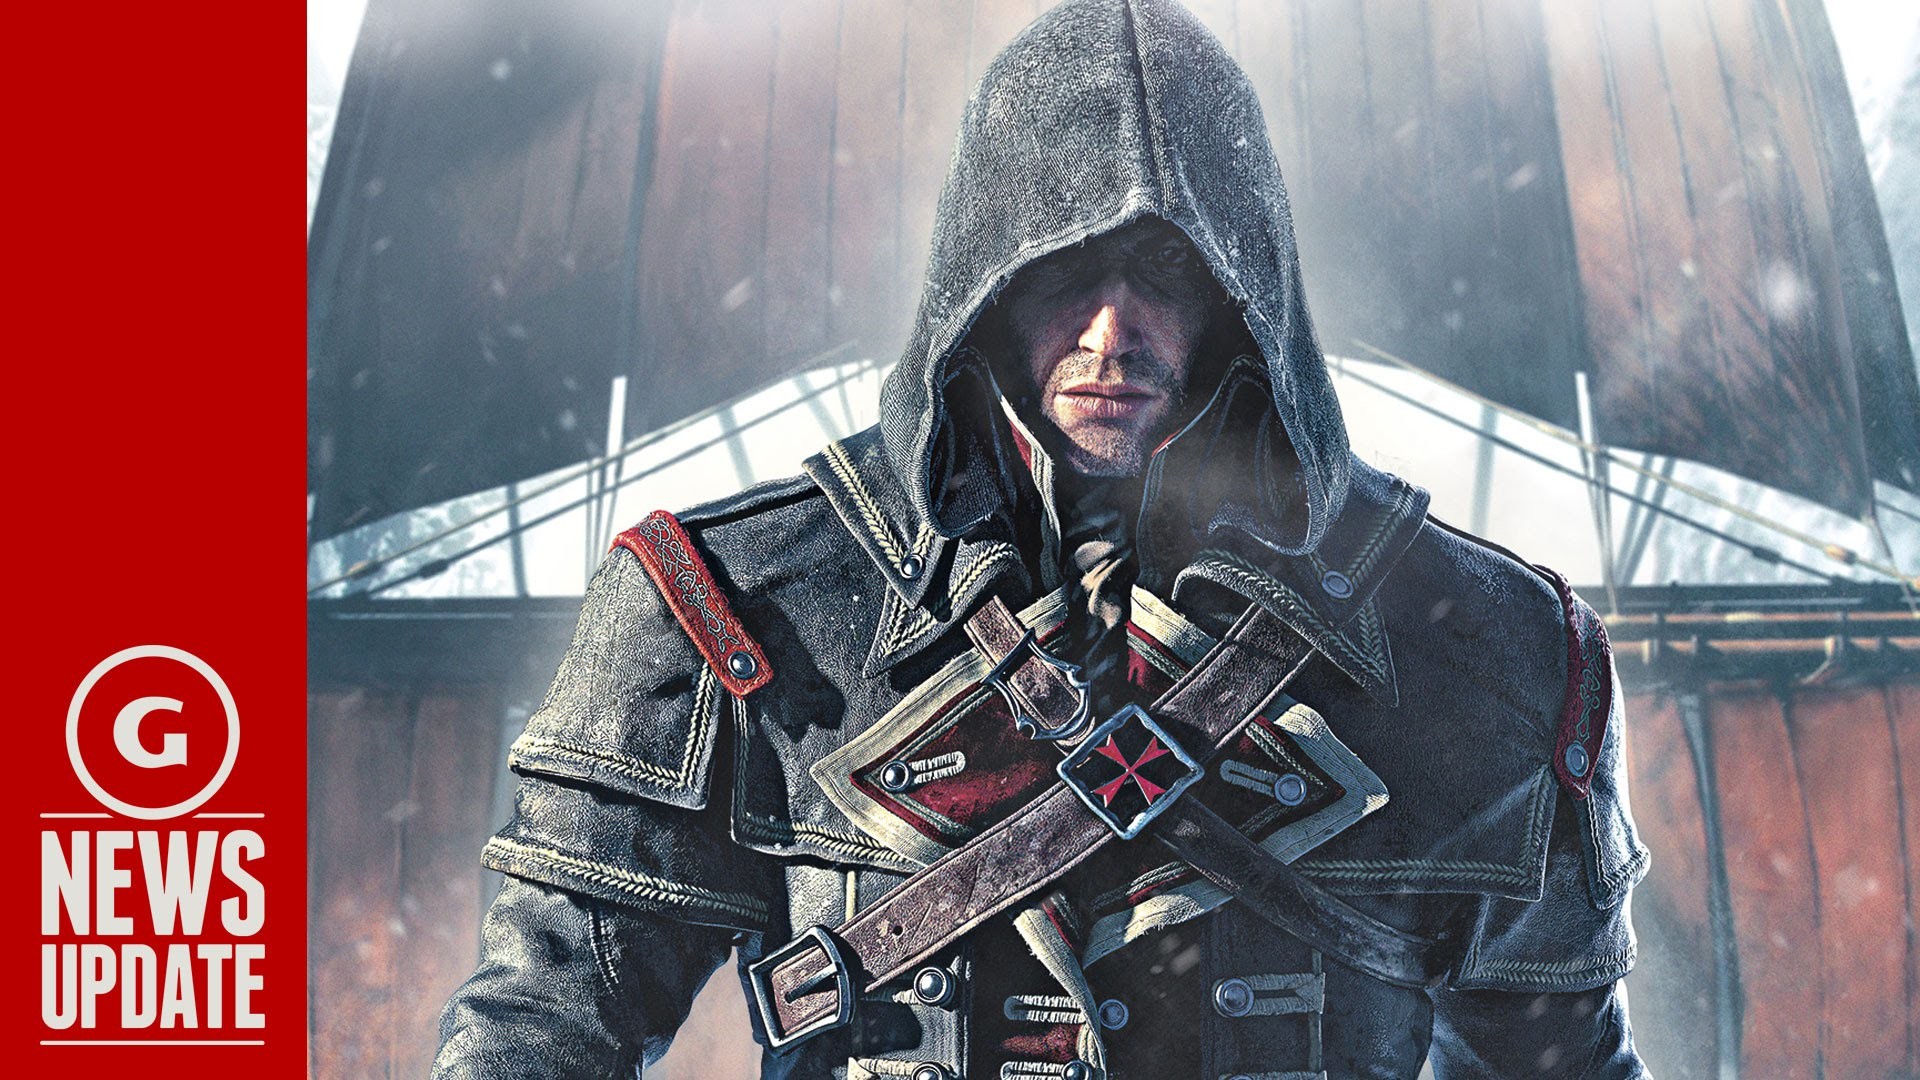 1920x1080 Assassin's Creed Rogue Confirmed for Xbox 360 and PS3 - GS News Update -  YouTube